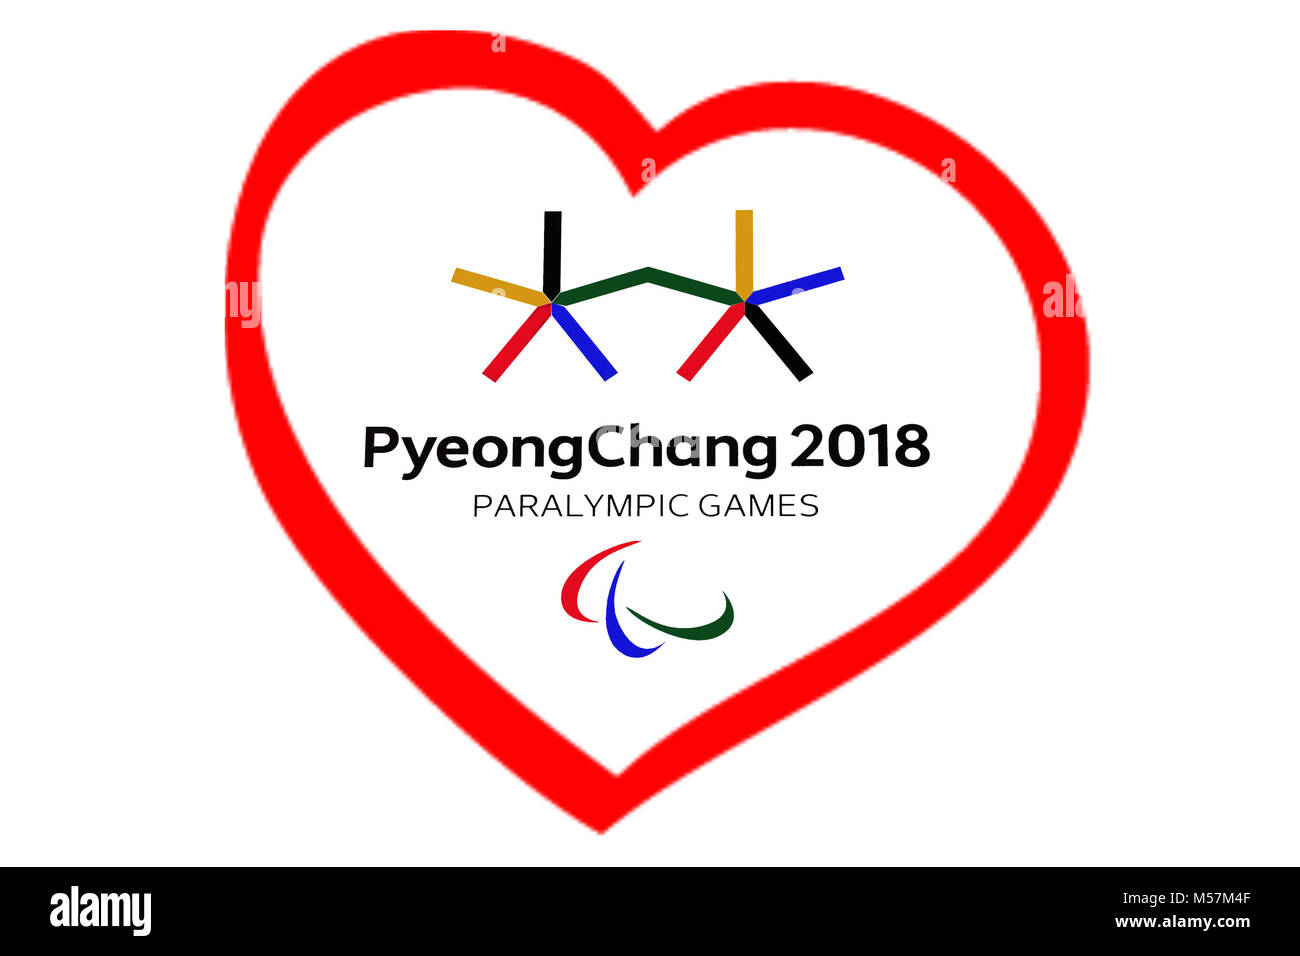 14 December 2017 Moscow, Russia Symbols XII Winter Paralympic Games in Pyeongchang, Republic of Korea in the red heart Stock Photo